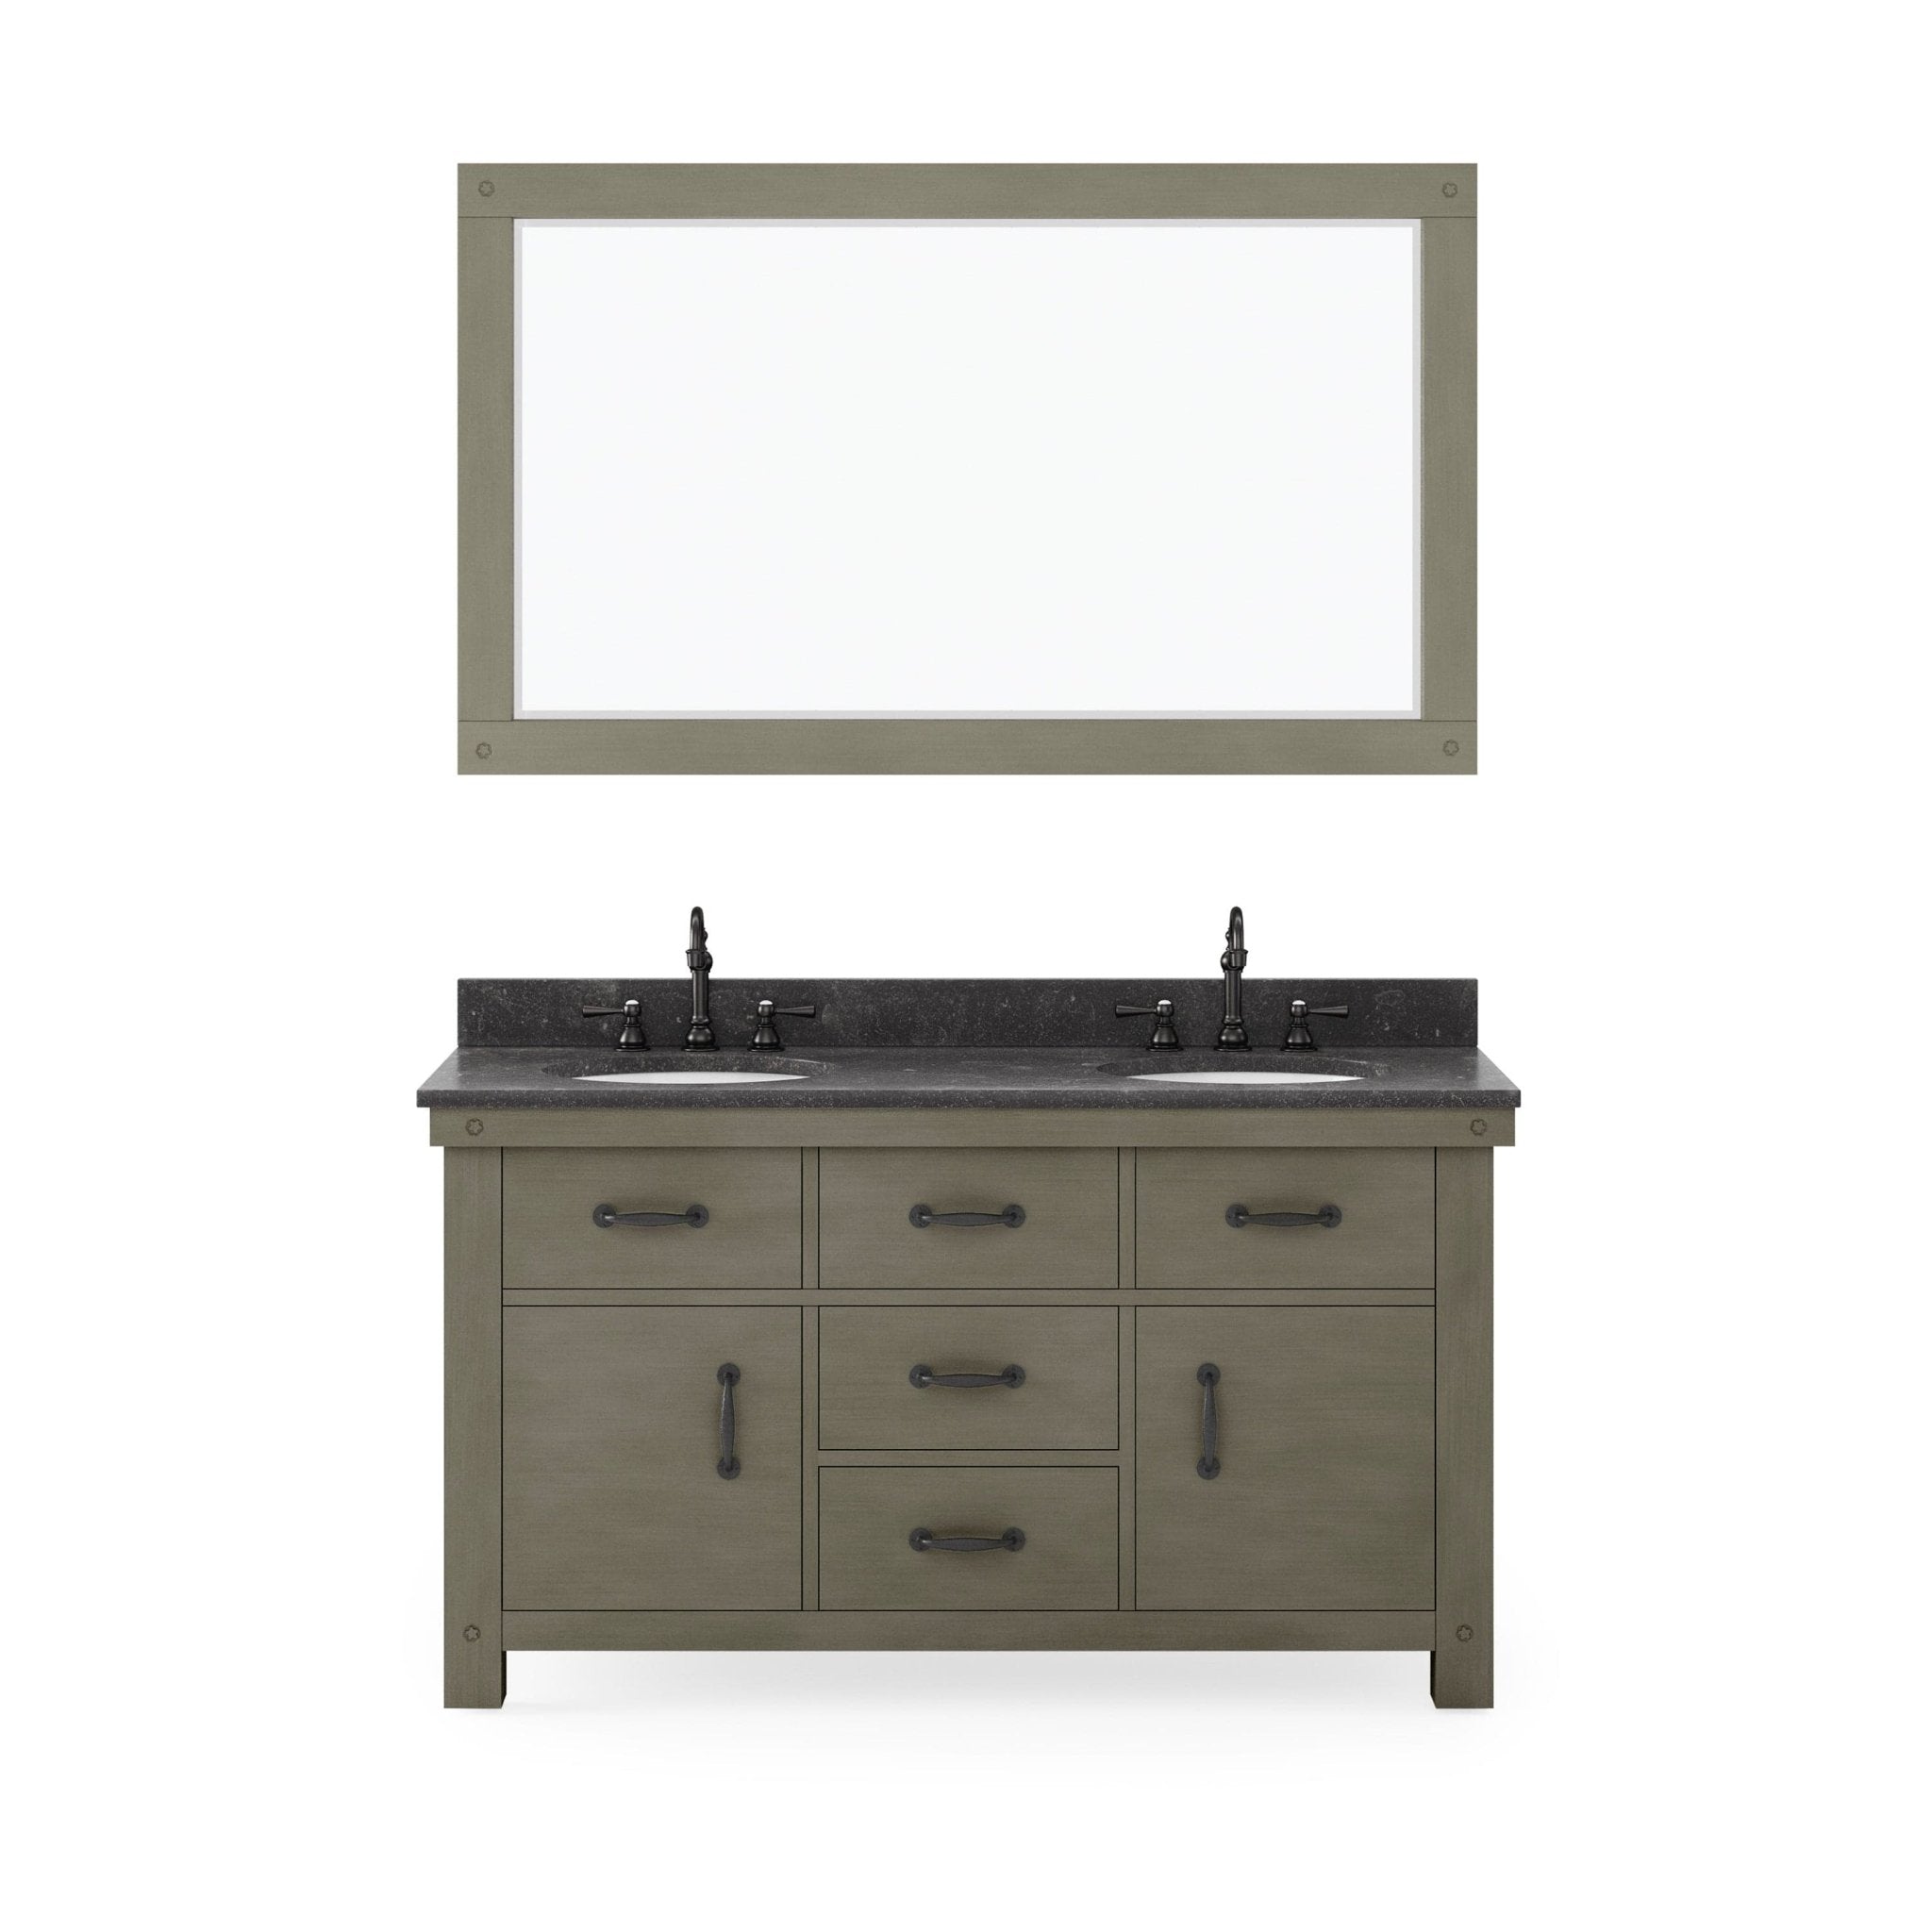 60 Inch Grizzle Grey Double Sink Bathroom Vanity With Mirror With Blue Limestone Counter Top From The ABERDEEN Collection - Molaix732030749689Bathroom VanitiesAB60BL03GG-A60000000